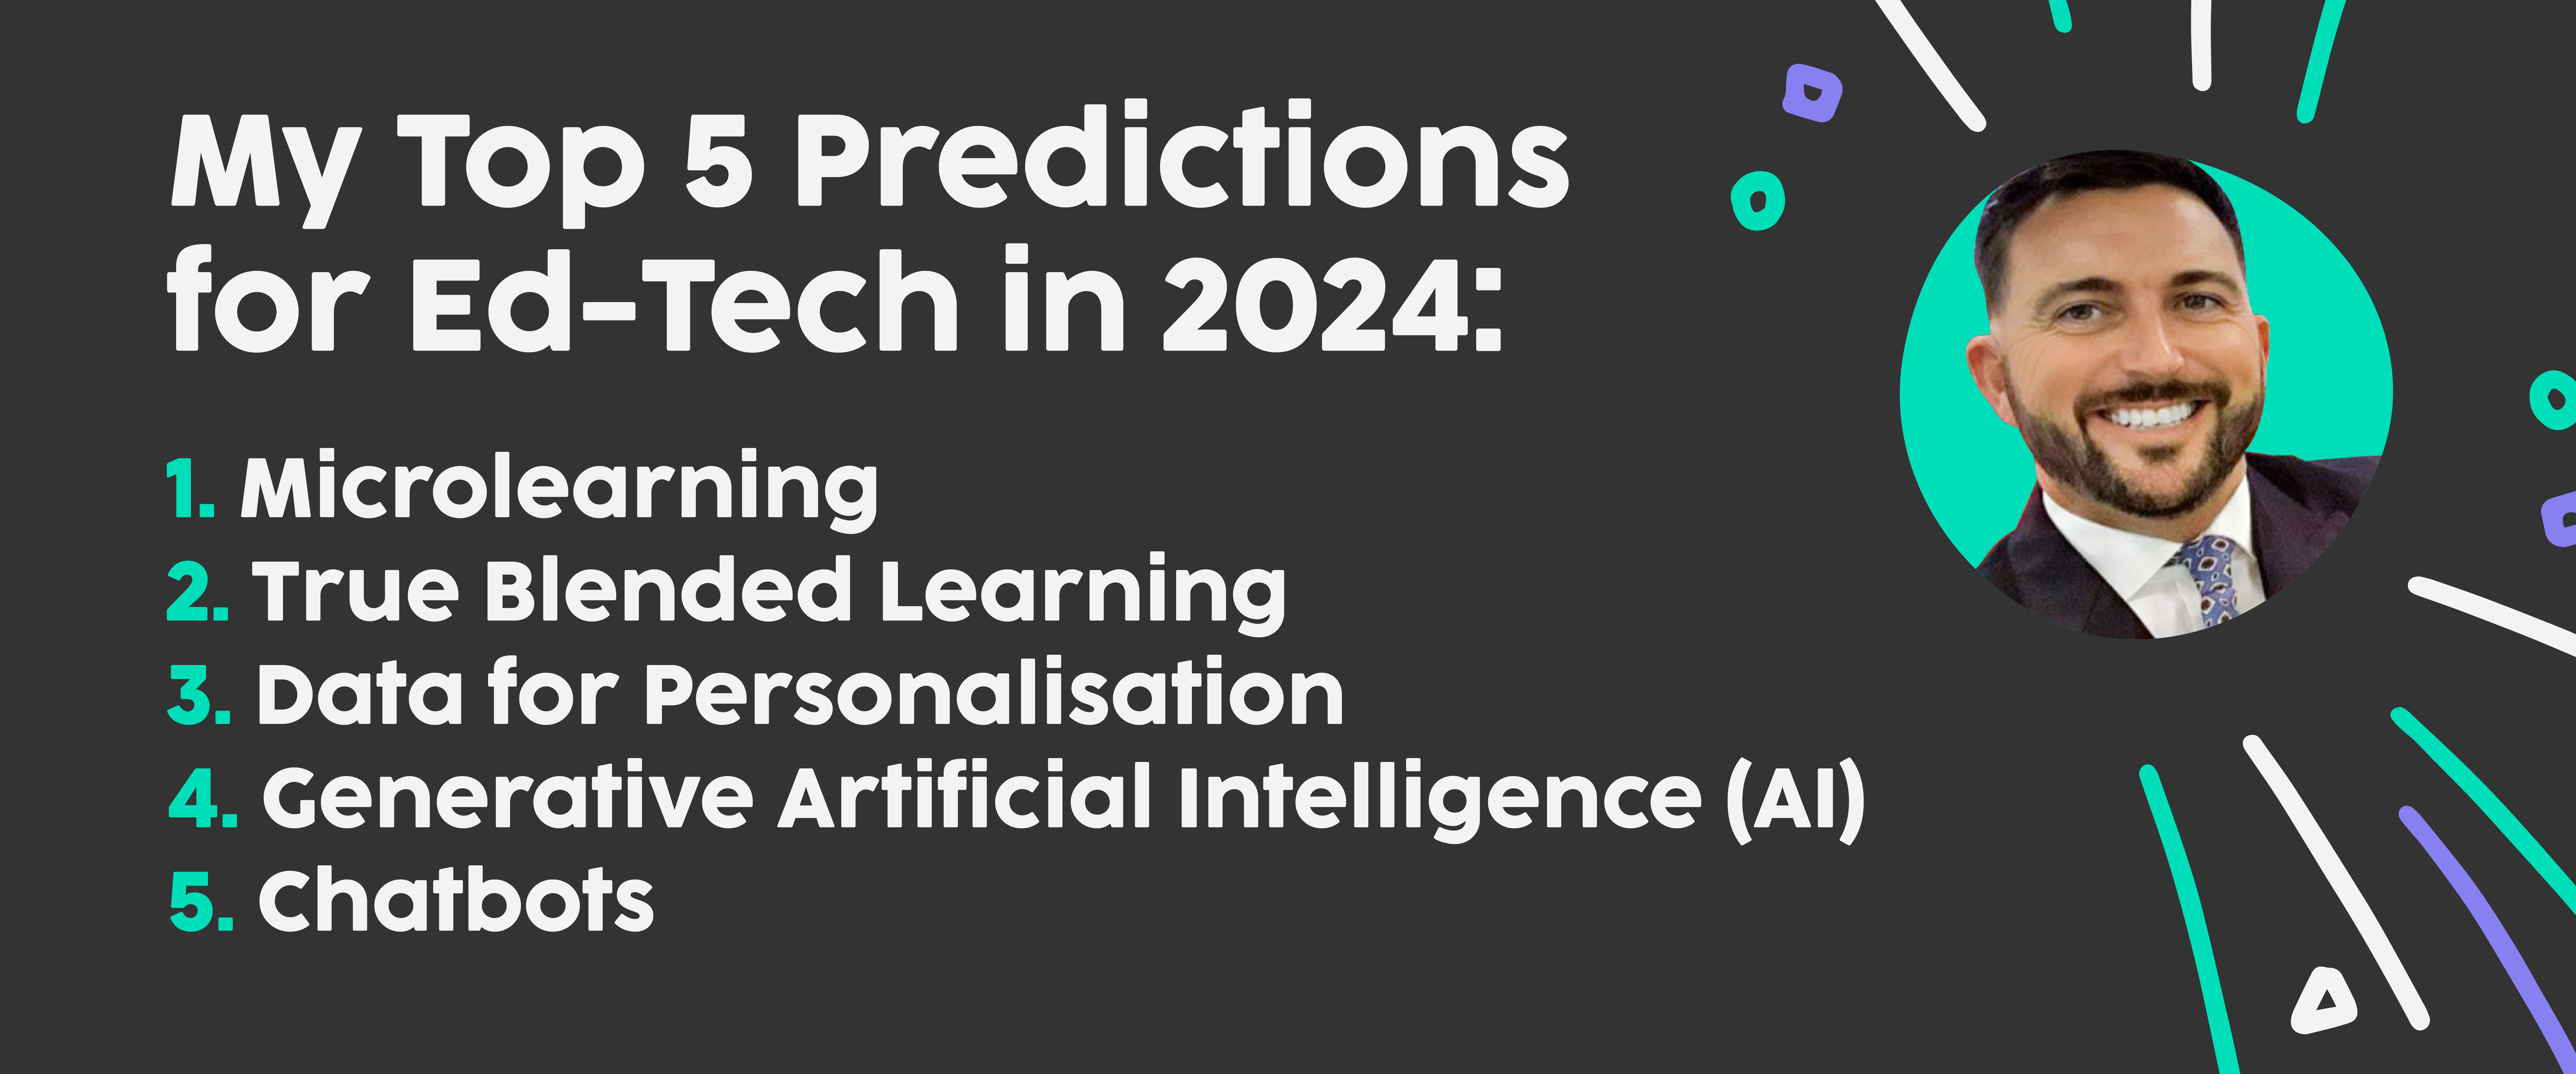 Education Technology predictions in 2024